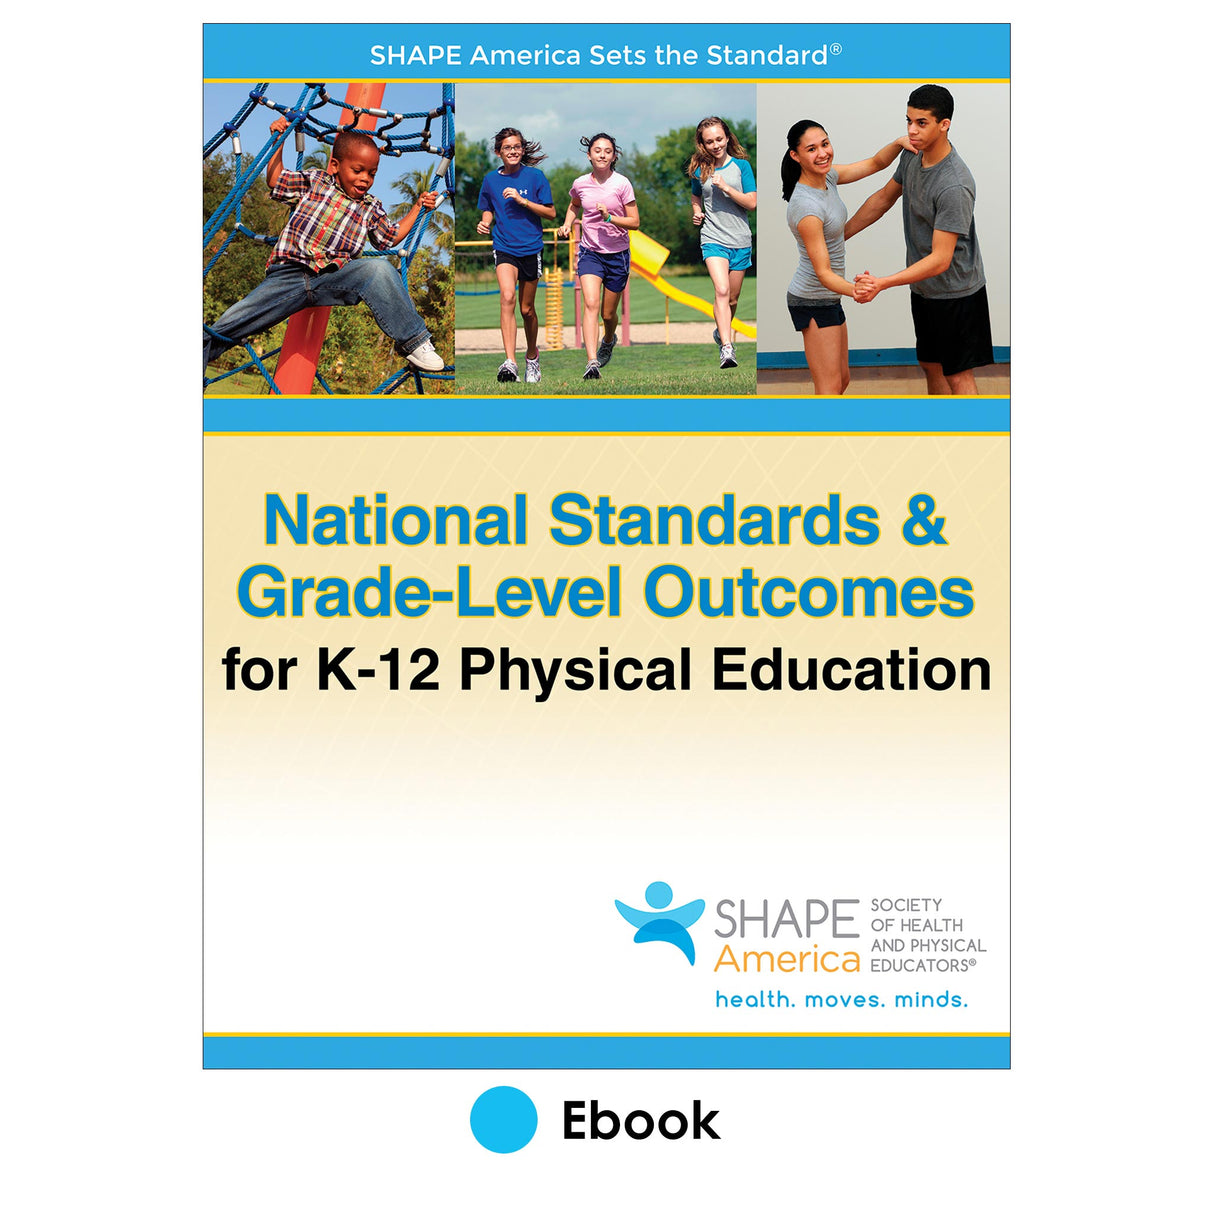 National Standards & Grade-Level Outcomes for K-12 Physical Education PDF